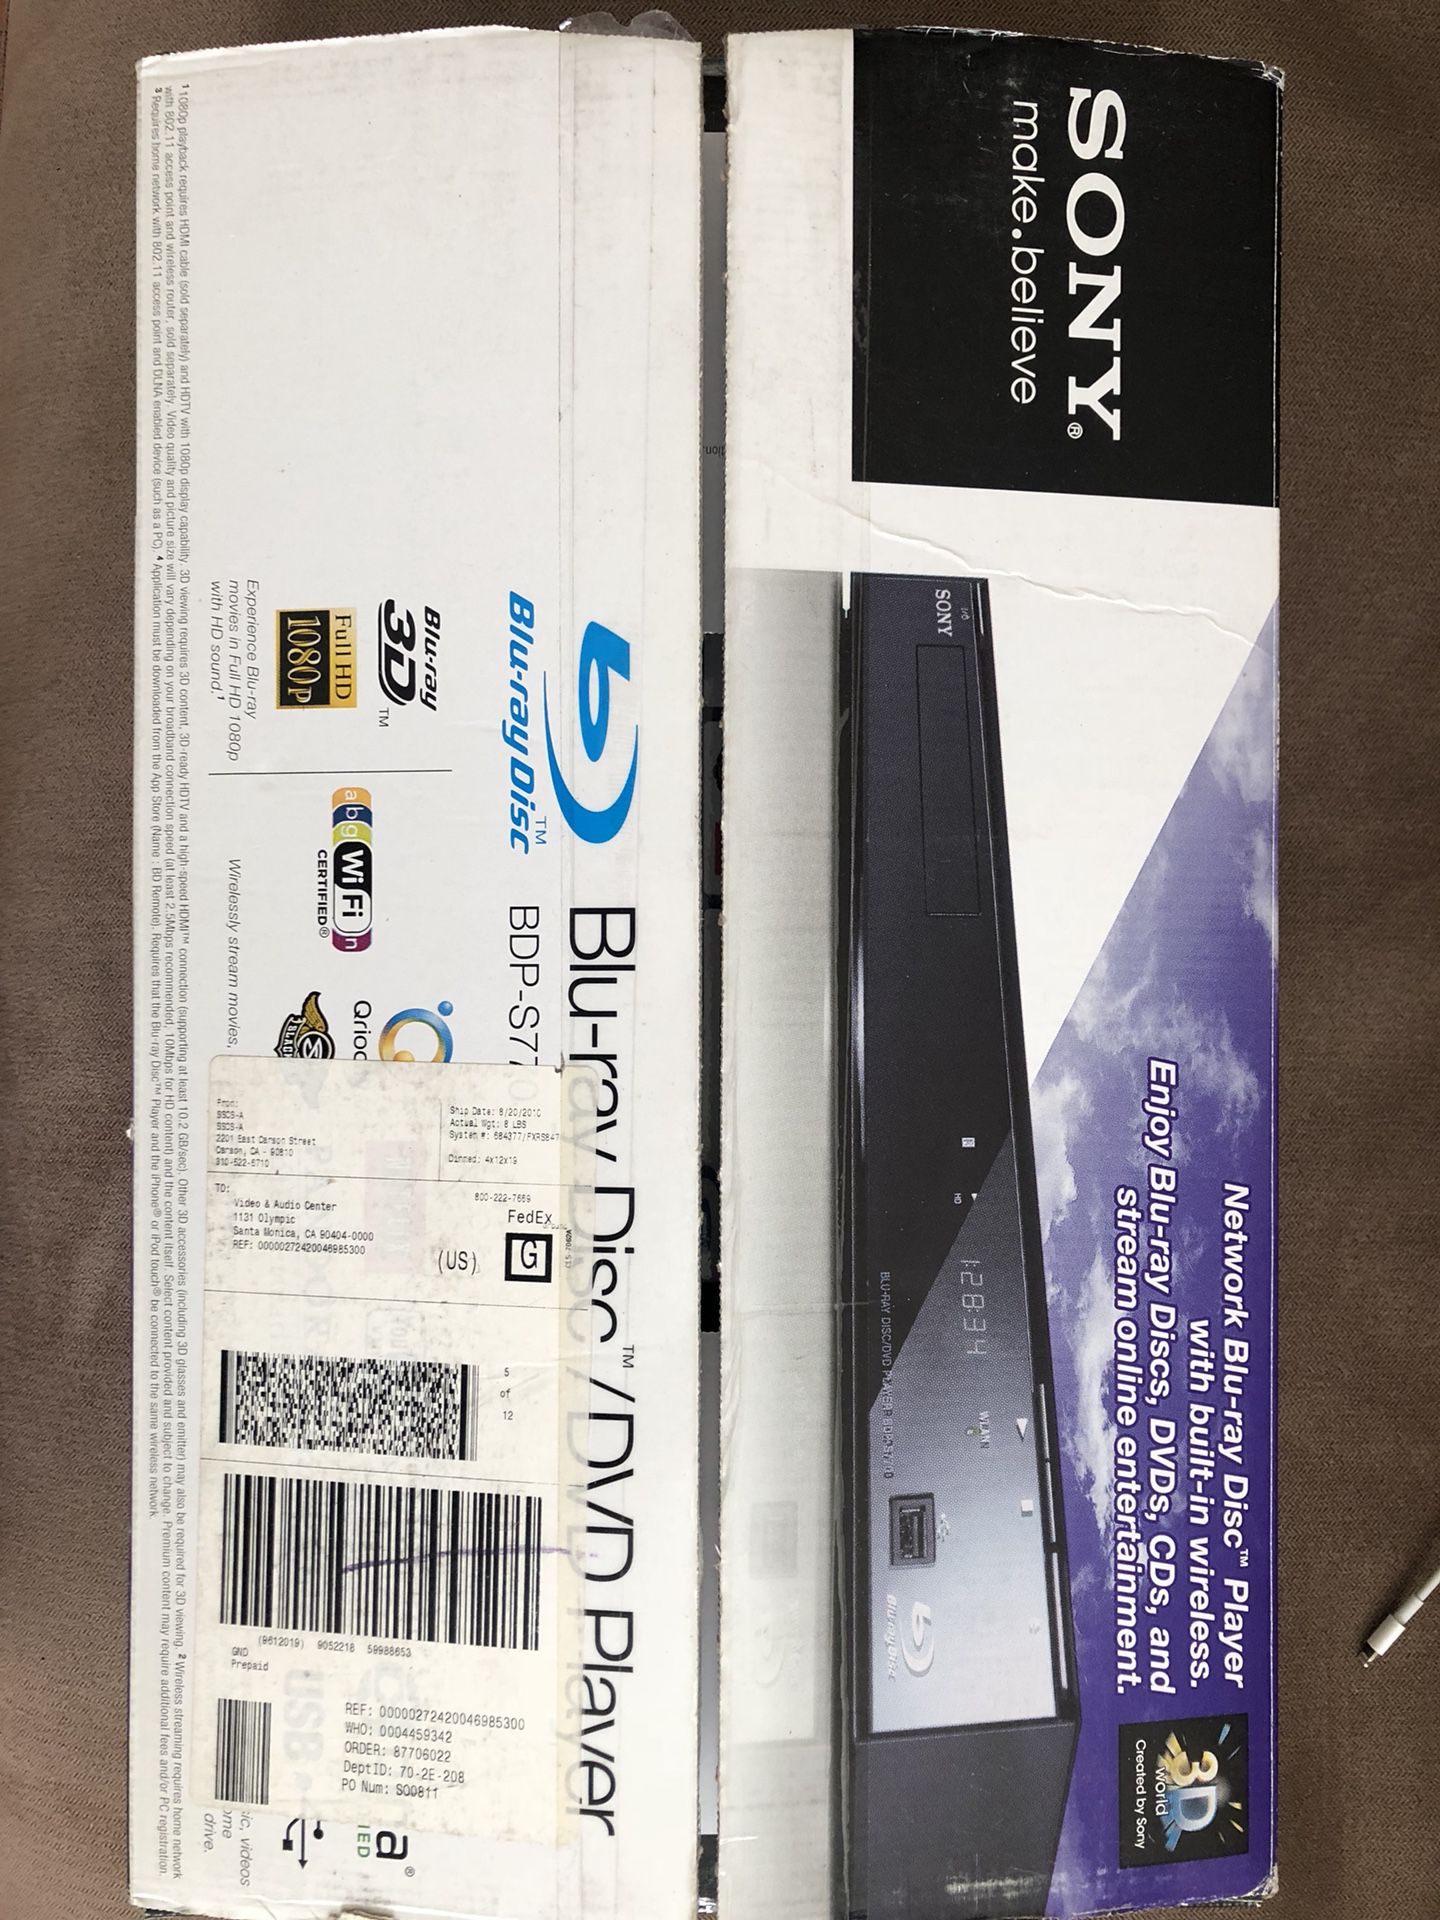 Awesome deal (Bravia 40 inch TV + Sony Blu-ray/dvd player + TV stand+ Sony 3D Starter Kit)